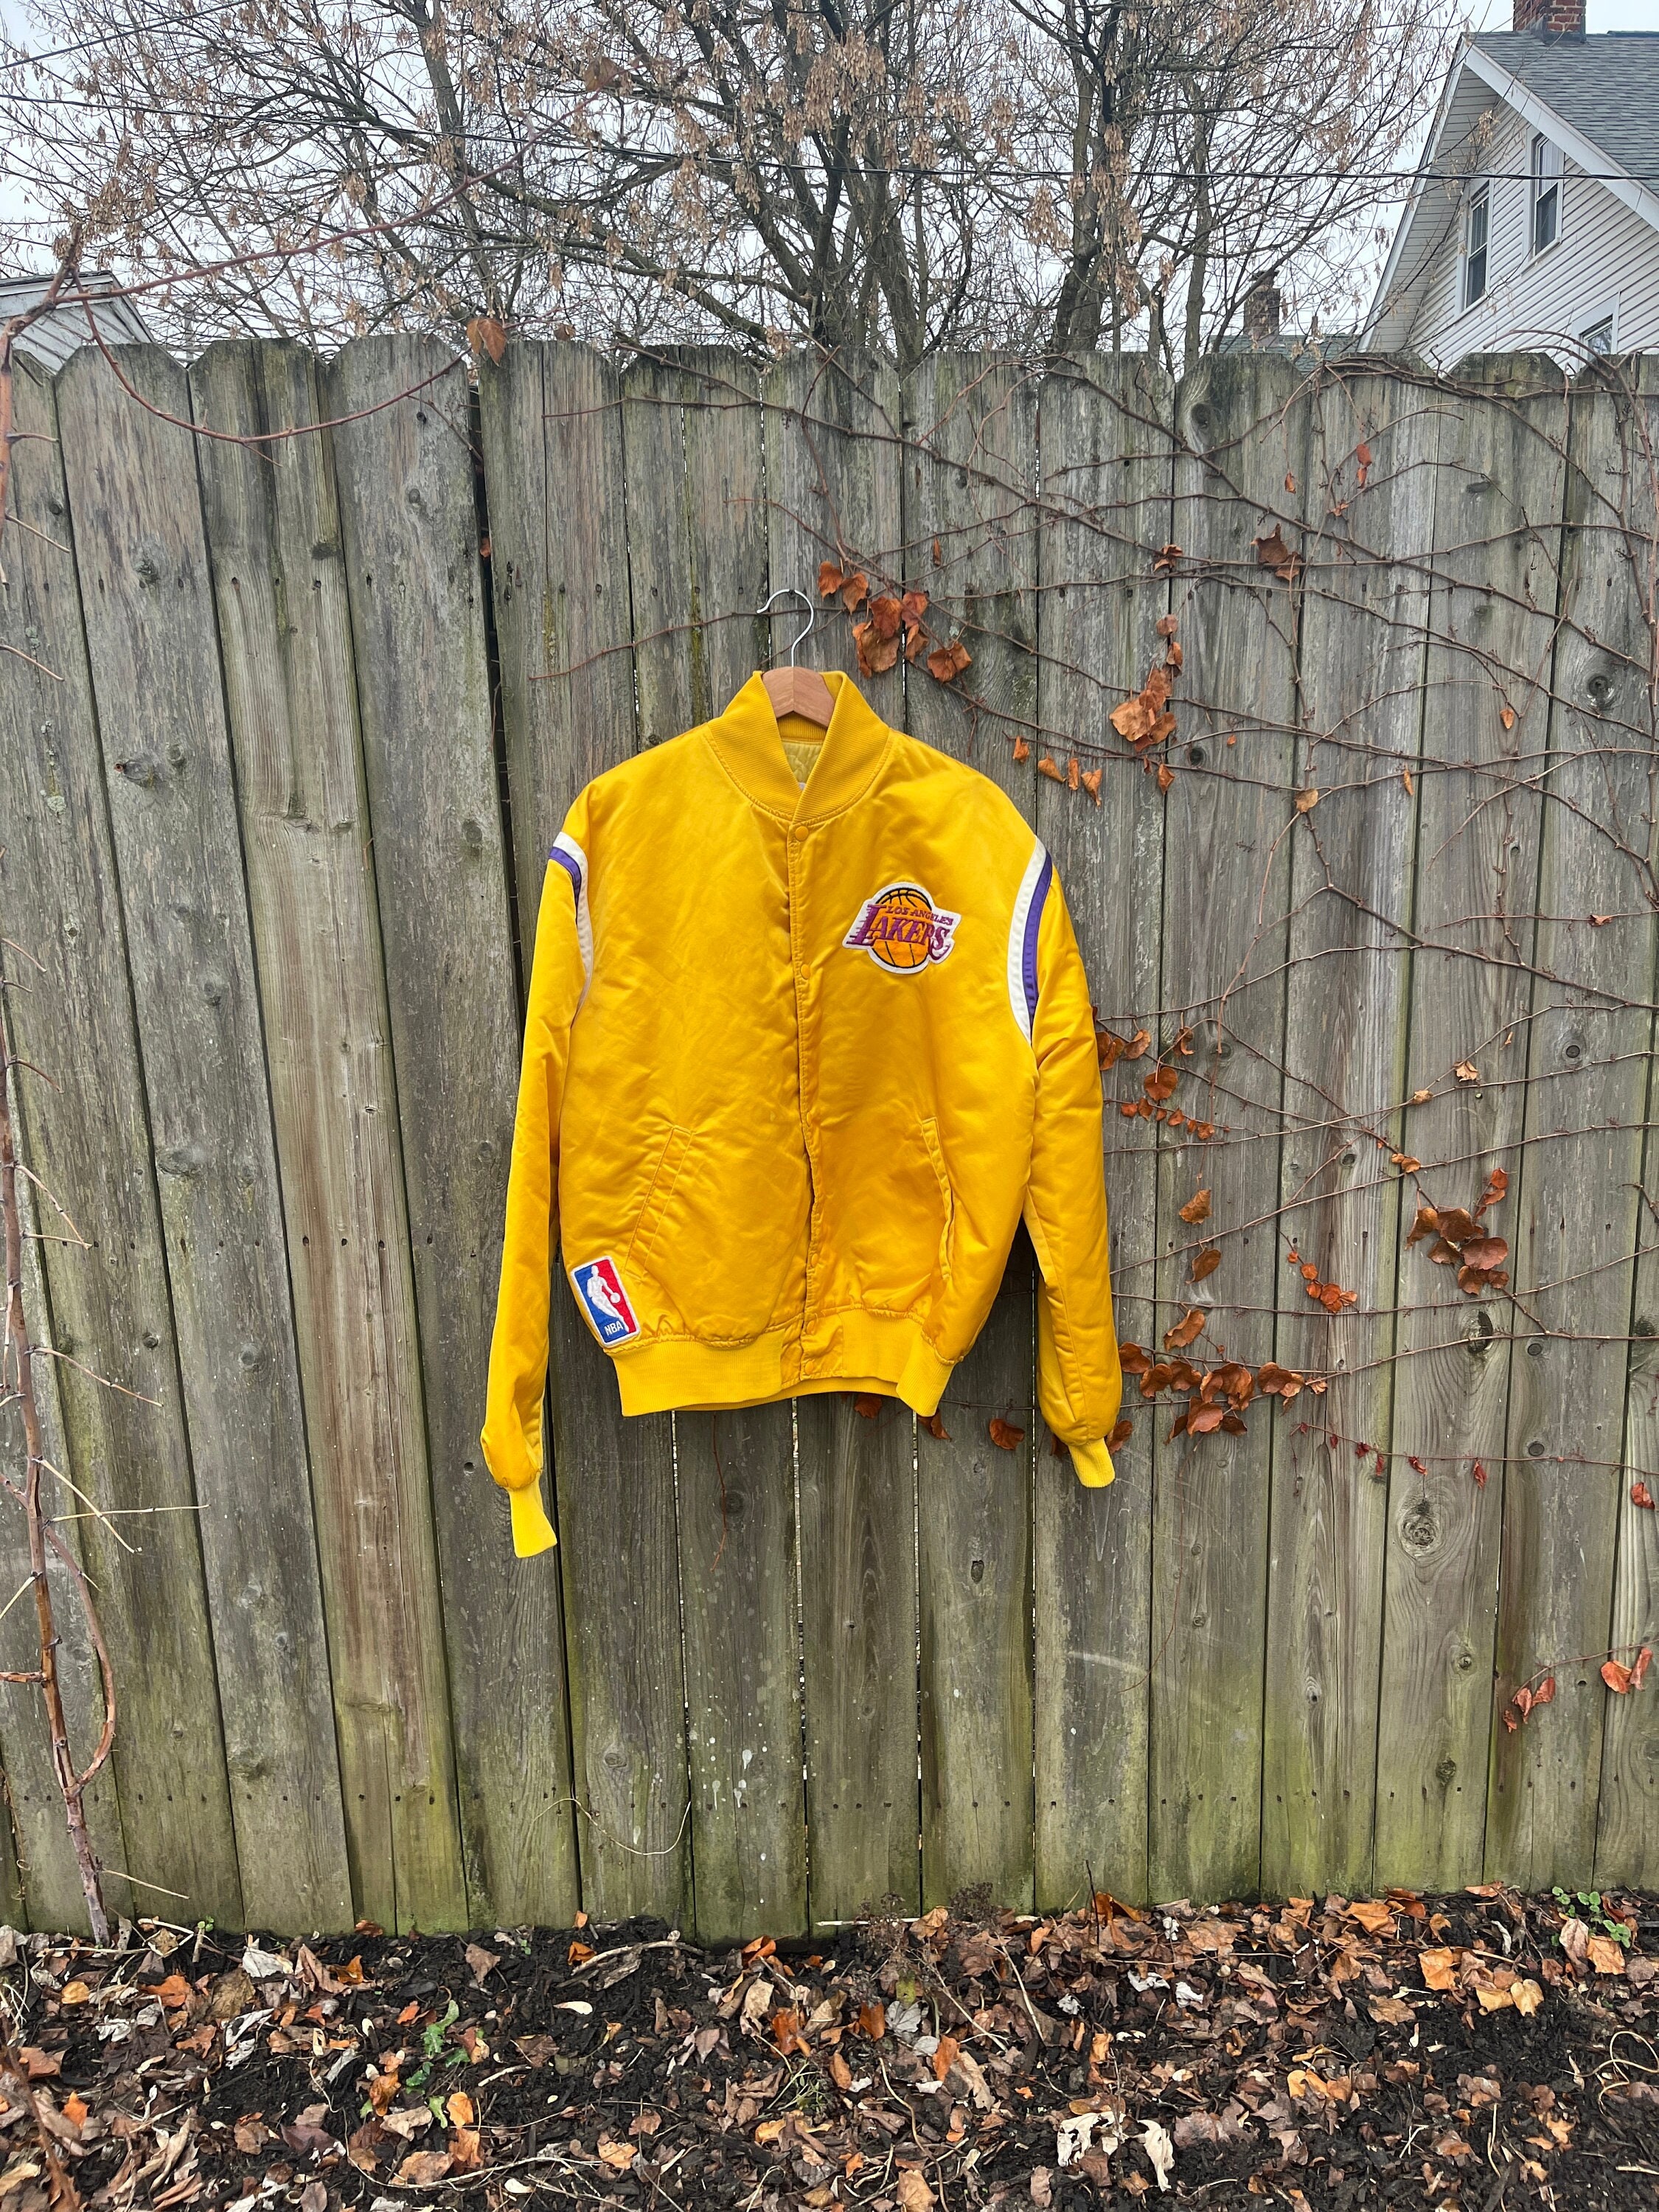 Los Angeles Lakers NBA Track Jacket - Large – The Vintage Store